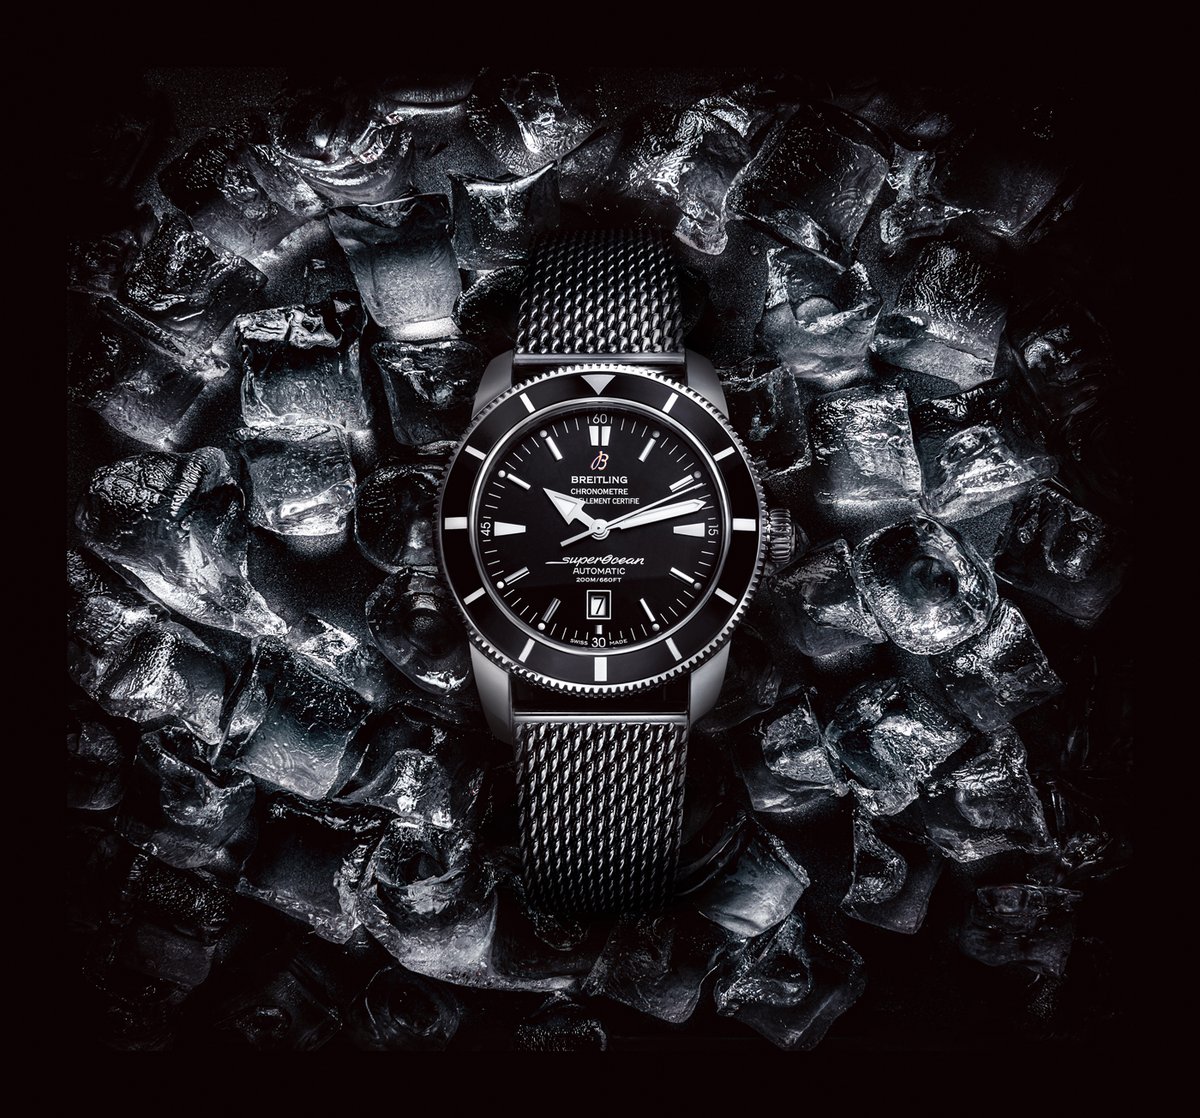 Breitling Super Ocean Heritage Watch
©Wallace | AmbientLife 

#productphotography #studiophotography #commercialphotography #photography #photographer #commercialphotographer #studio #watches #watchdesign #brietling